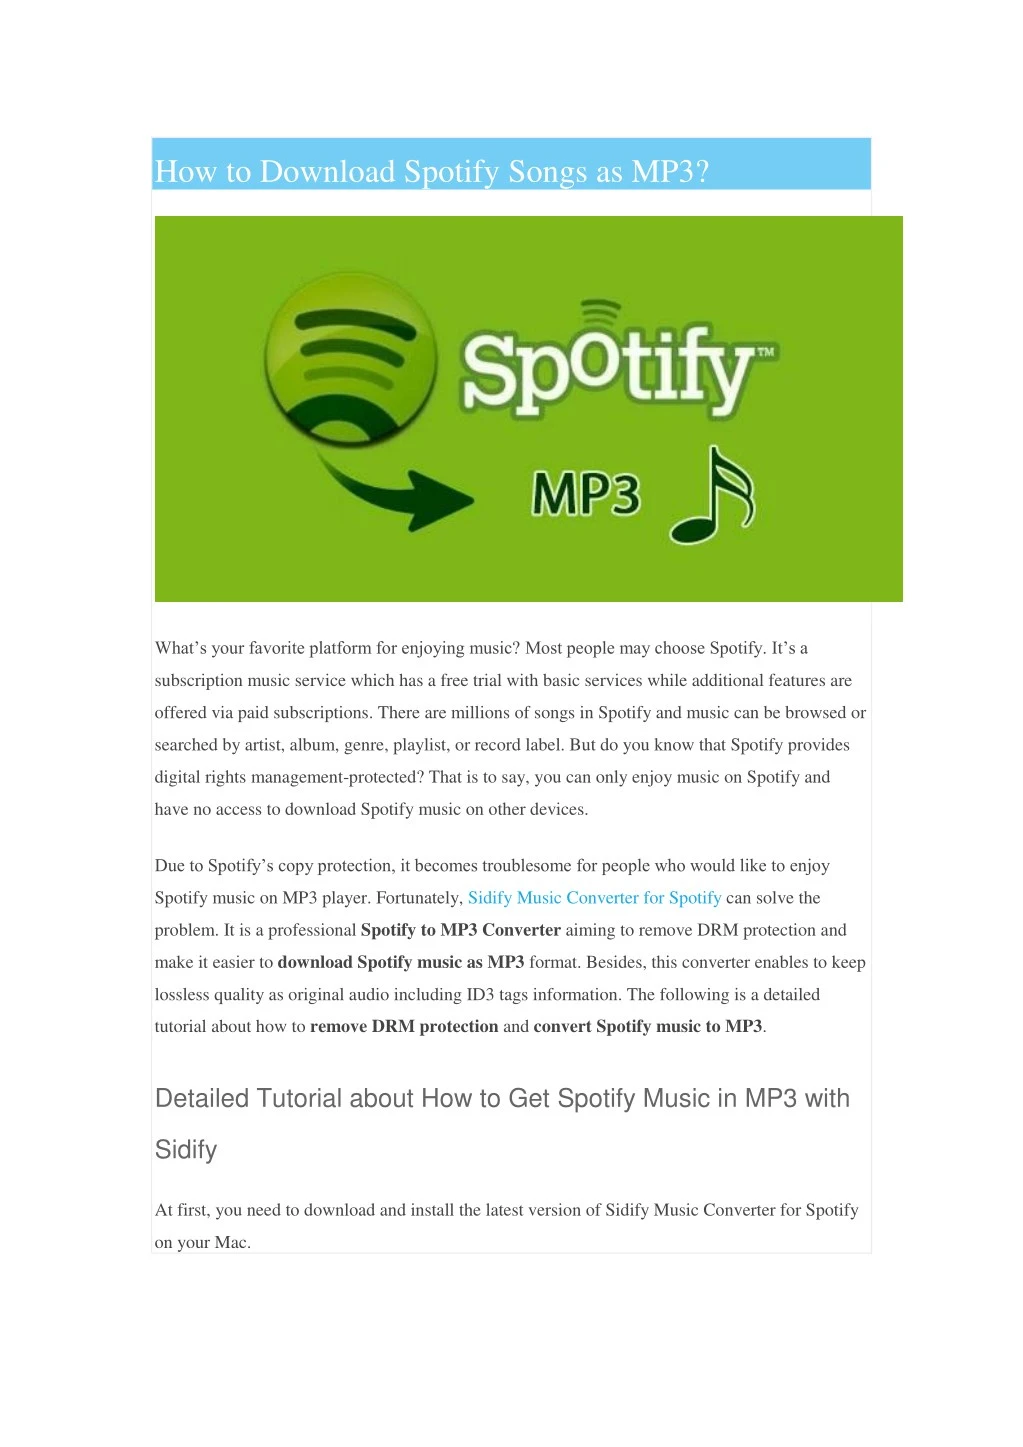 how to download spotify songs as mp3